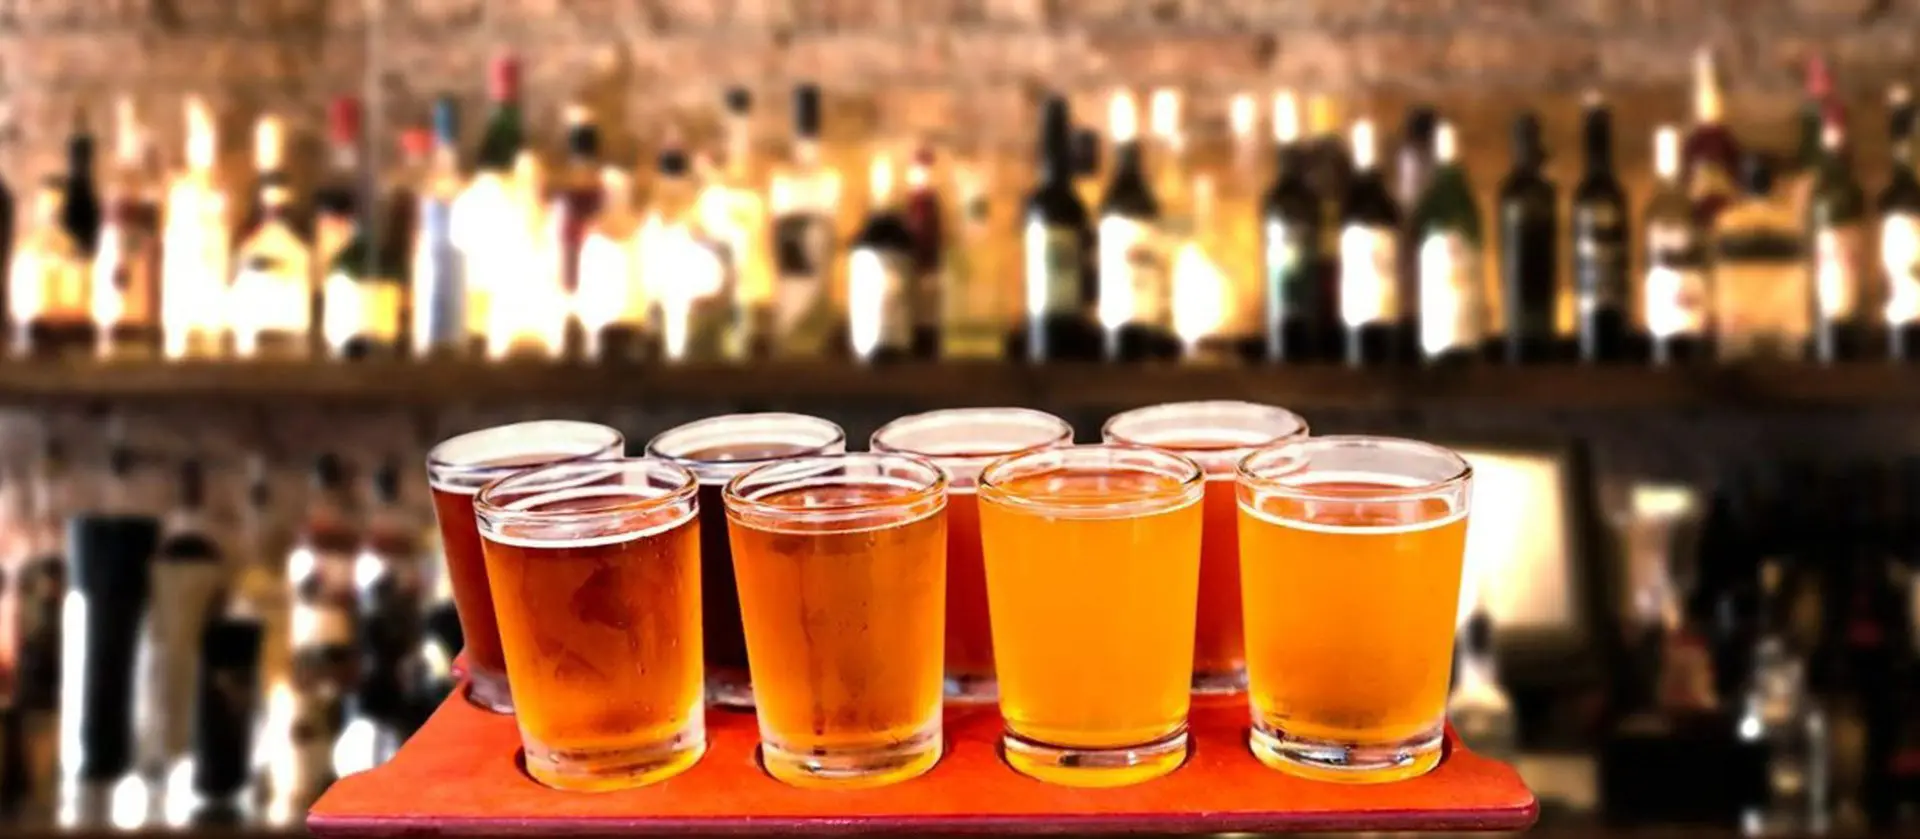 A row of glasses filled with different beers.